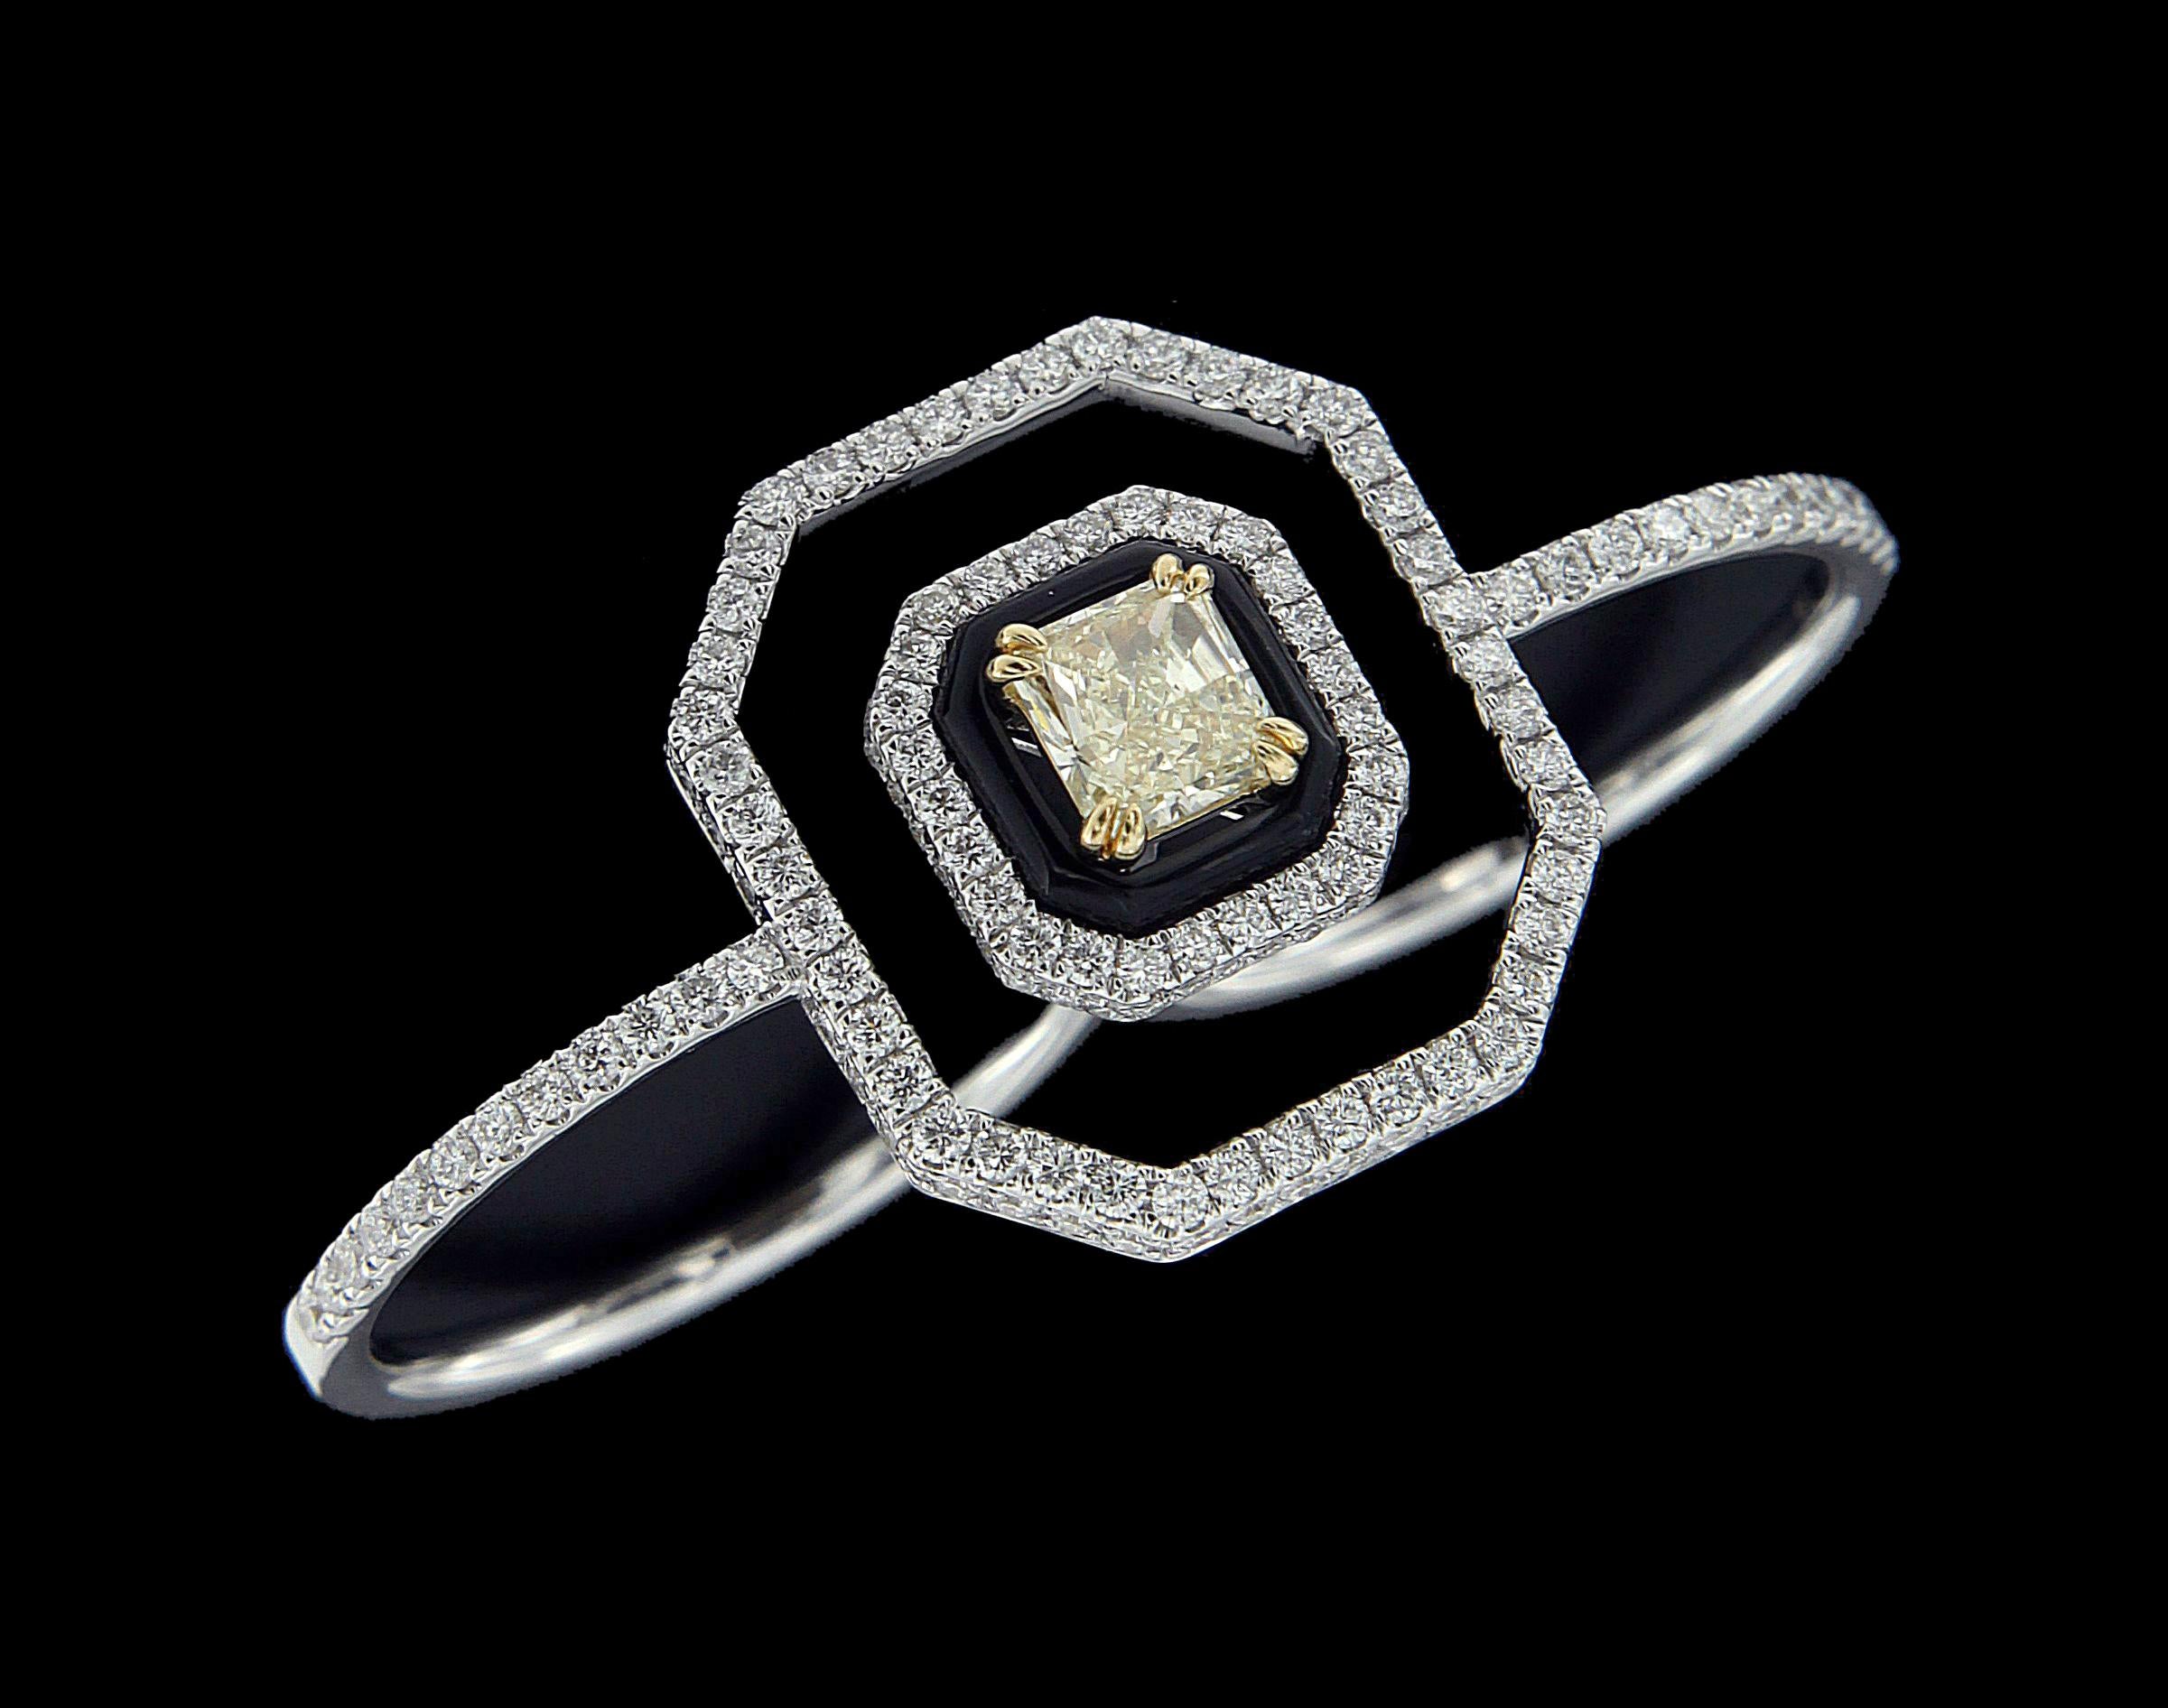 Elegant 18 Karat White Gold And Diamond Ring
Ring 
 Diamonds weighing approximately around 1.648 carats and semi precious stone of 0.60 carats, mounted on 18 karat white gold ring. The ring weighs around 6.47 grams approximately. 

Please note: The